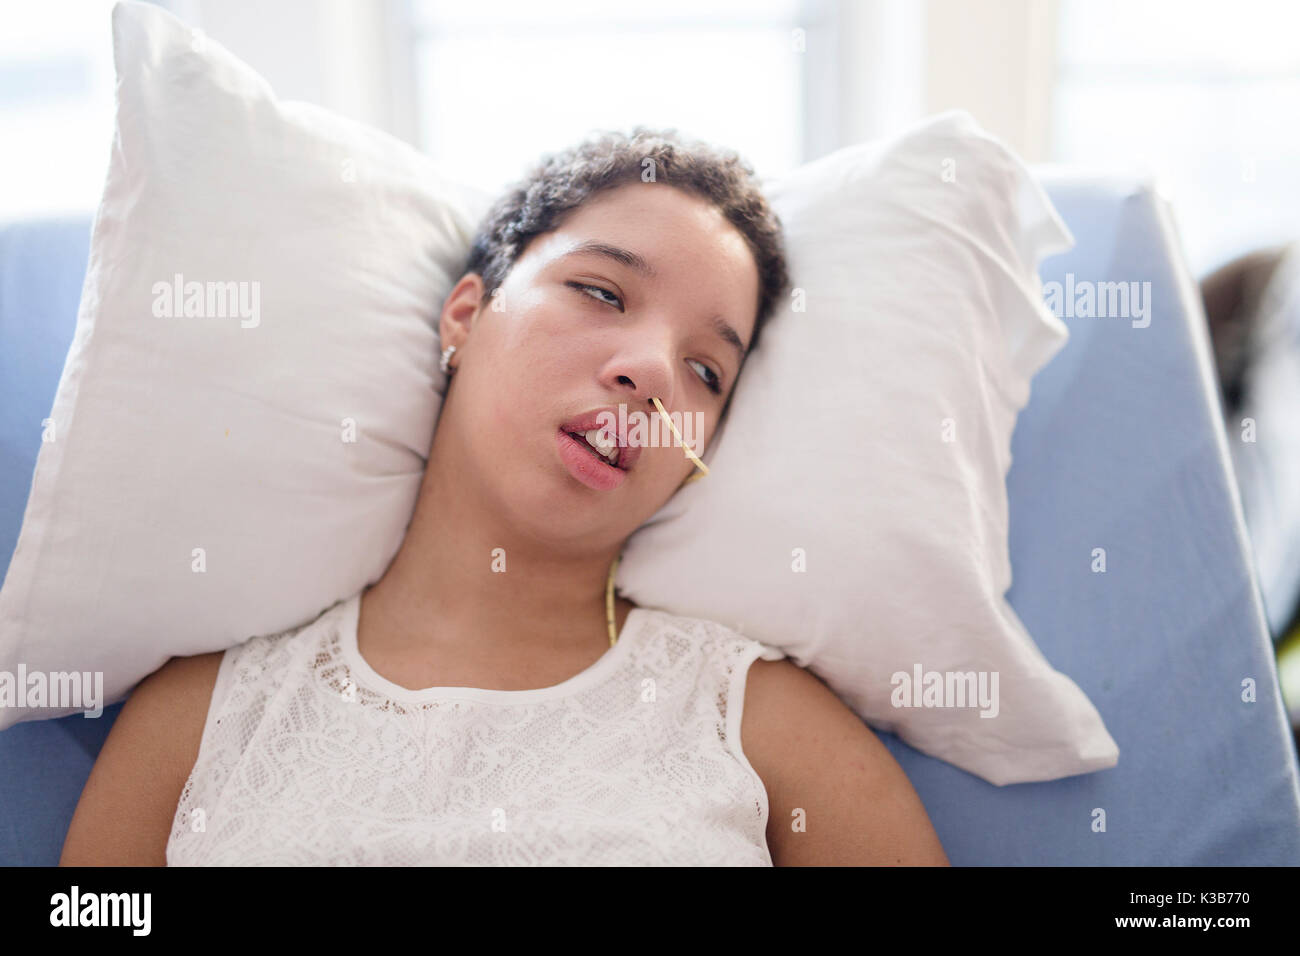 Sick patient lying on bed in hospital for medical background Stock Photo